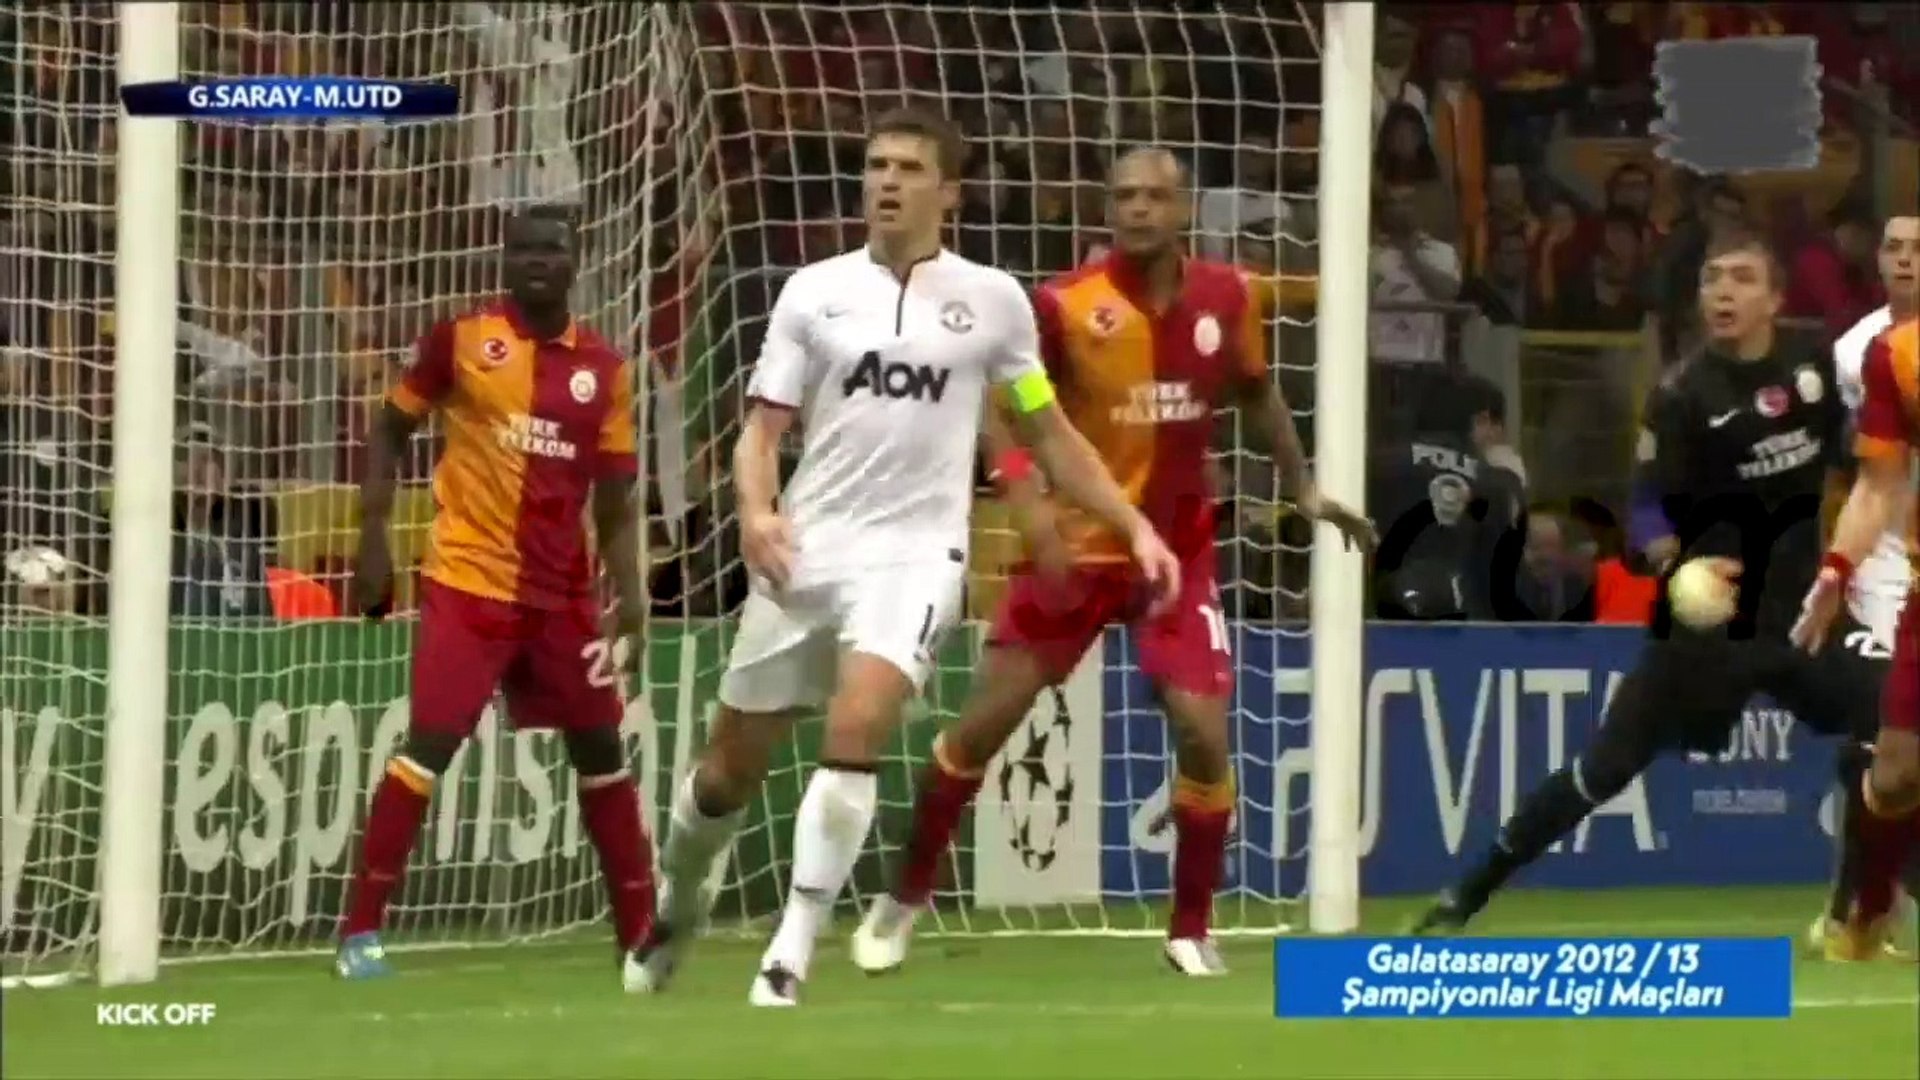 Galatasaray 1-0 Manchester United [HD] 20.11.2012 - 2012-2013 Champions  League Group H Matchday 5 (Ver. 2) - Dailymotion Video